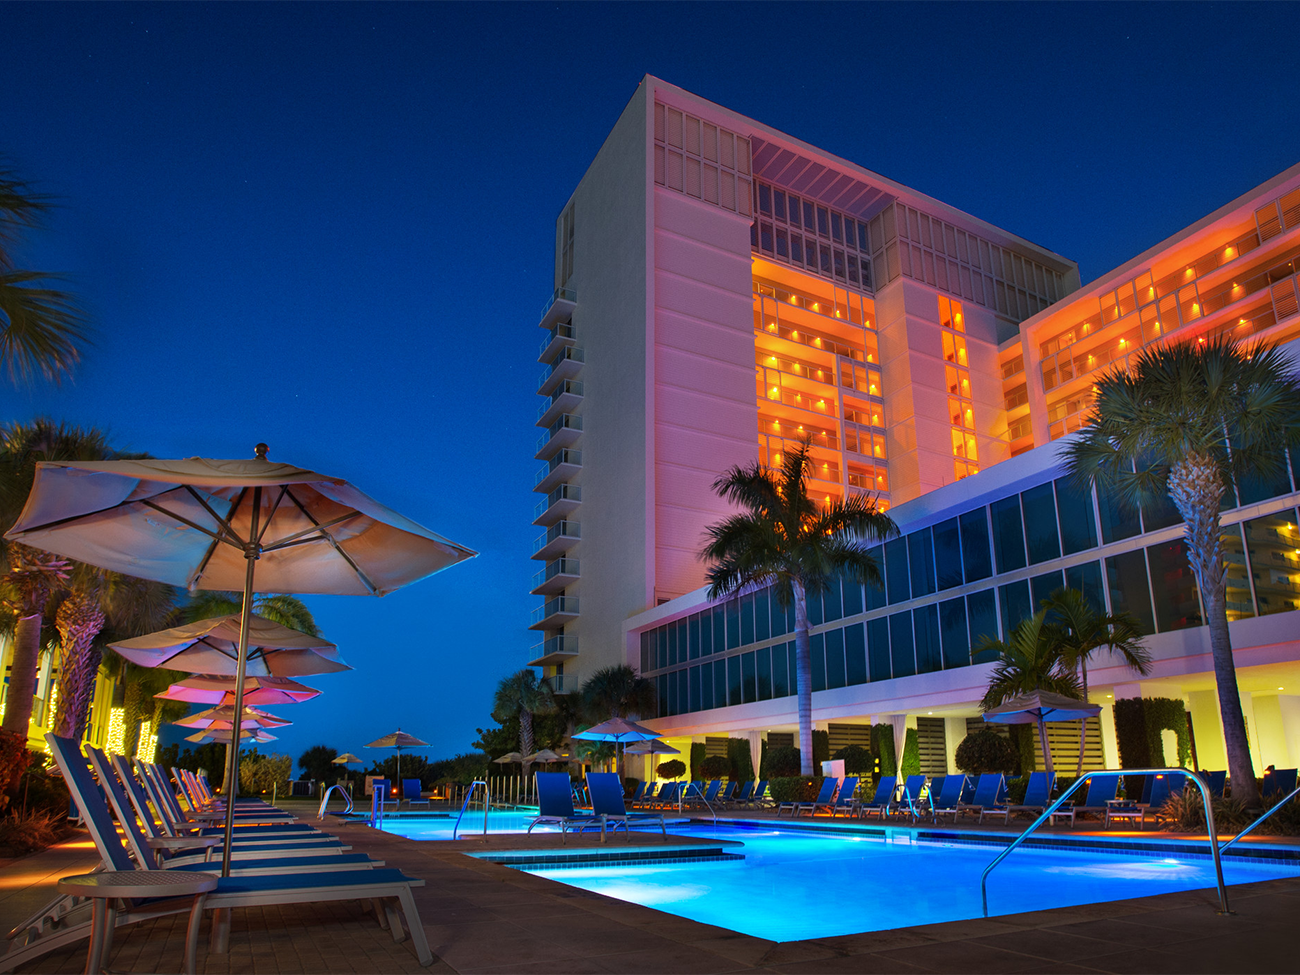 Image of Marriott's Crystal Shores in Marco Island.